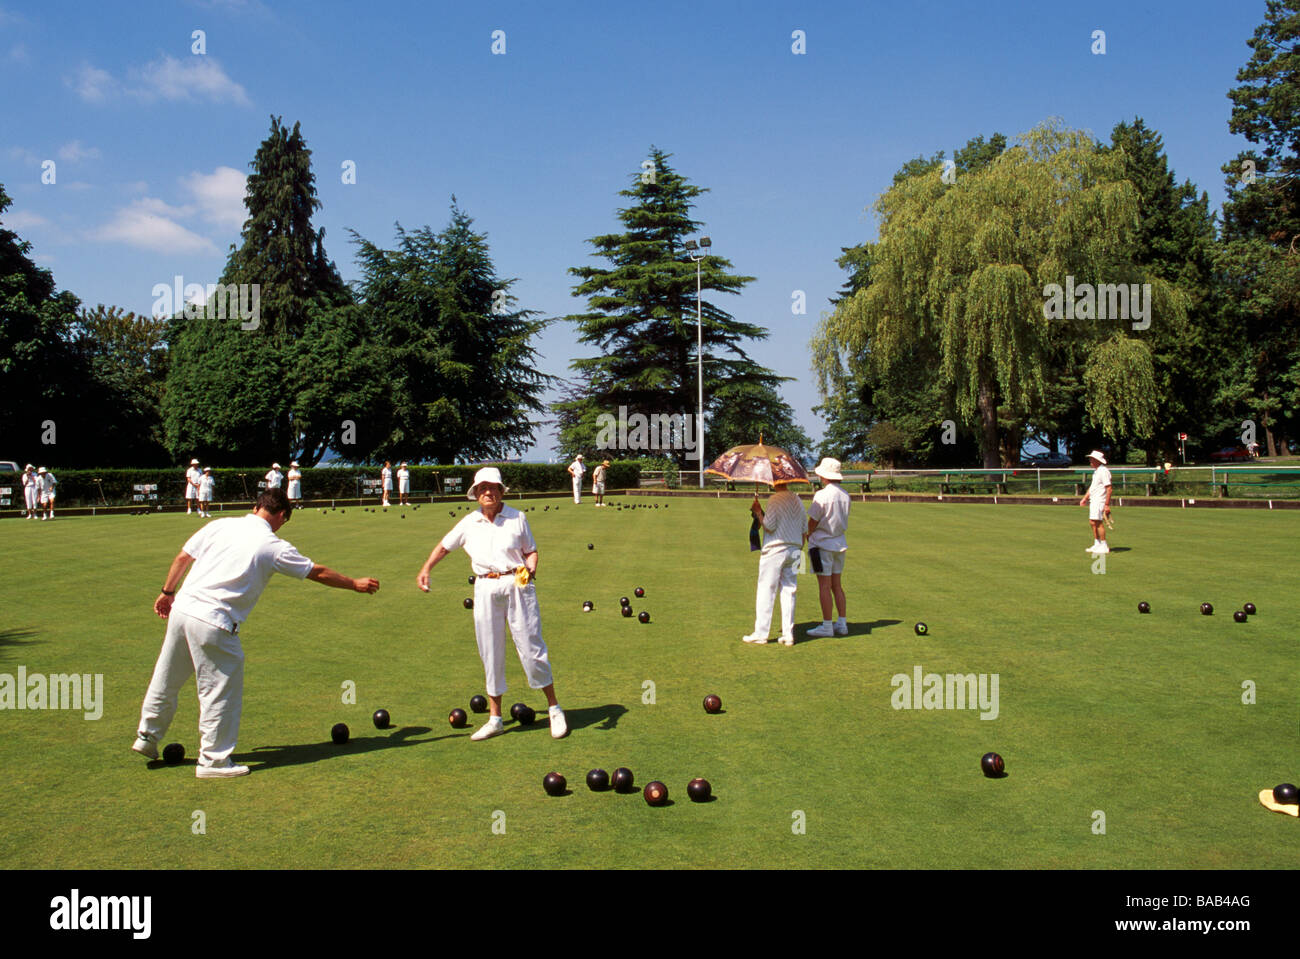 Seniors Lawn Bowling outdoors on Green Grass in Stanley Park in Summer Vancouver British Columbia Canada Stock Photo